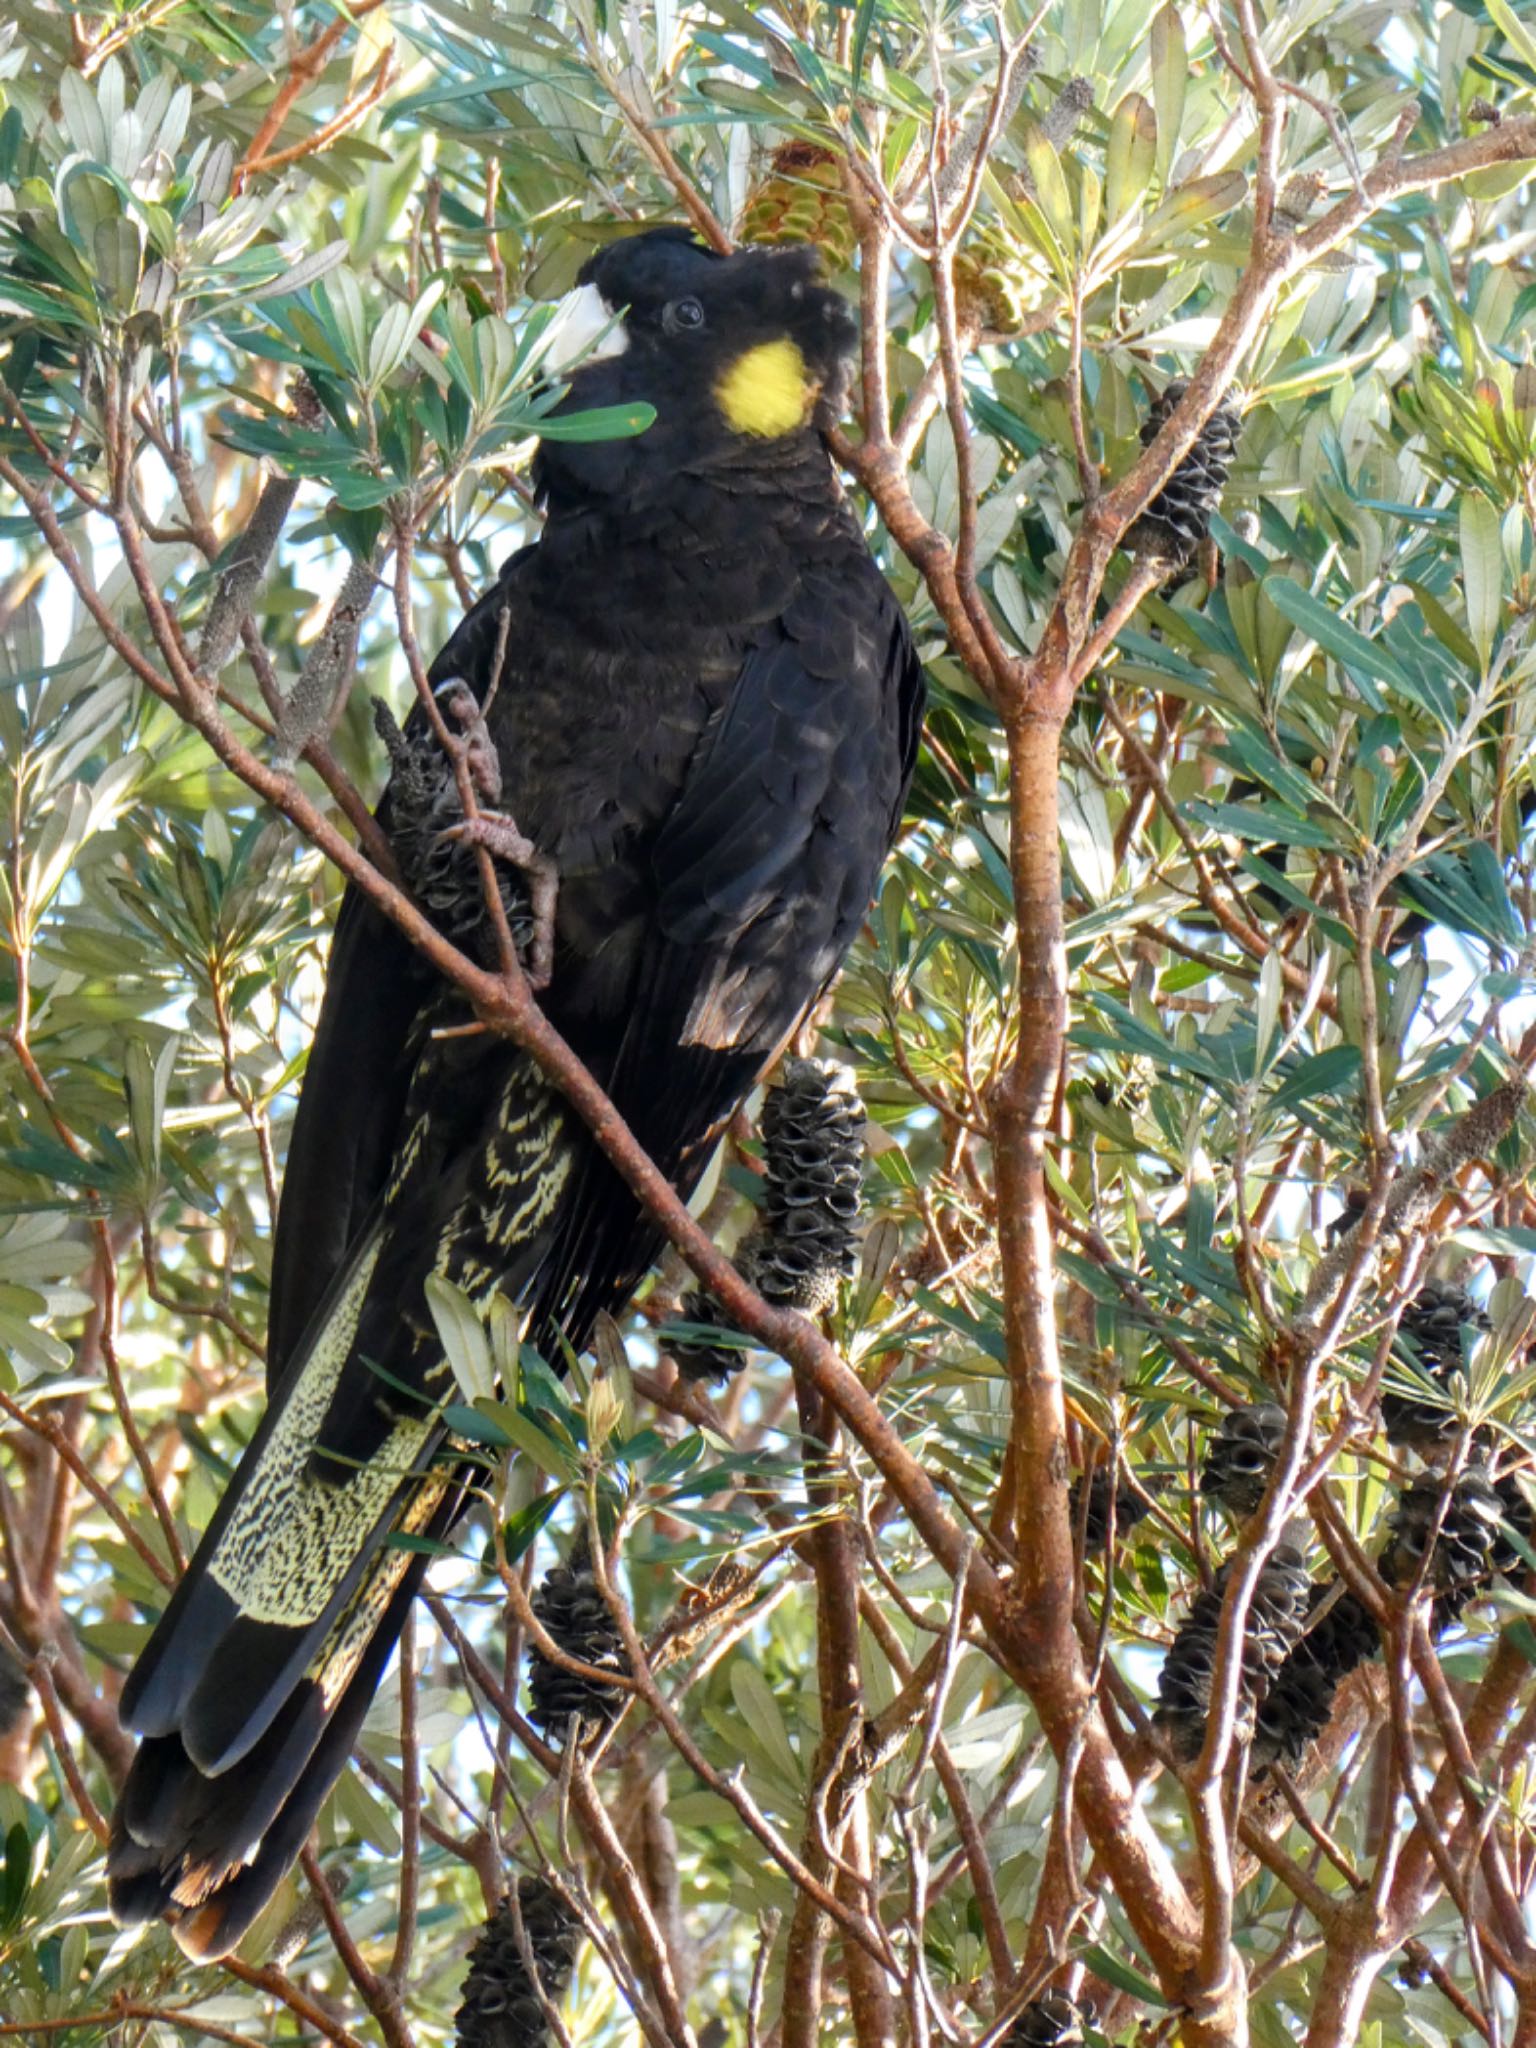 Photo of Yellow-tailed Black Cockatoo at The Entrance, NSW, Australia by Maki